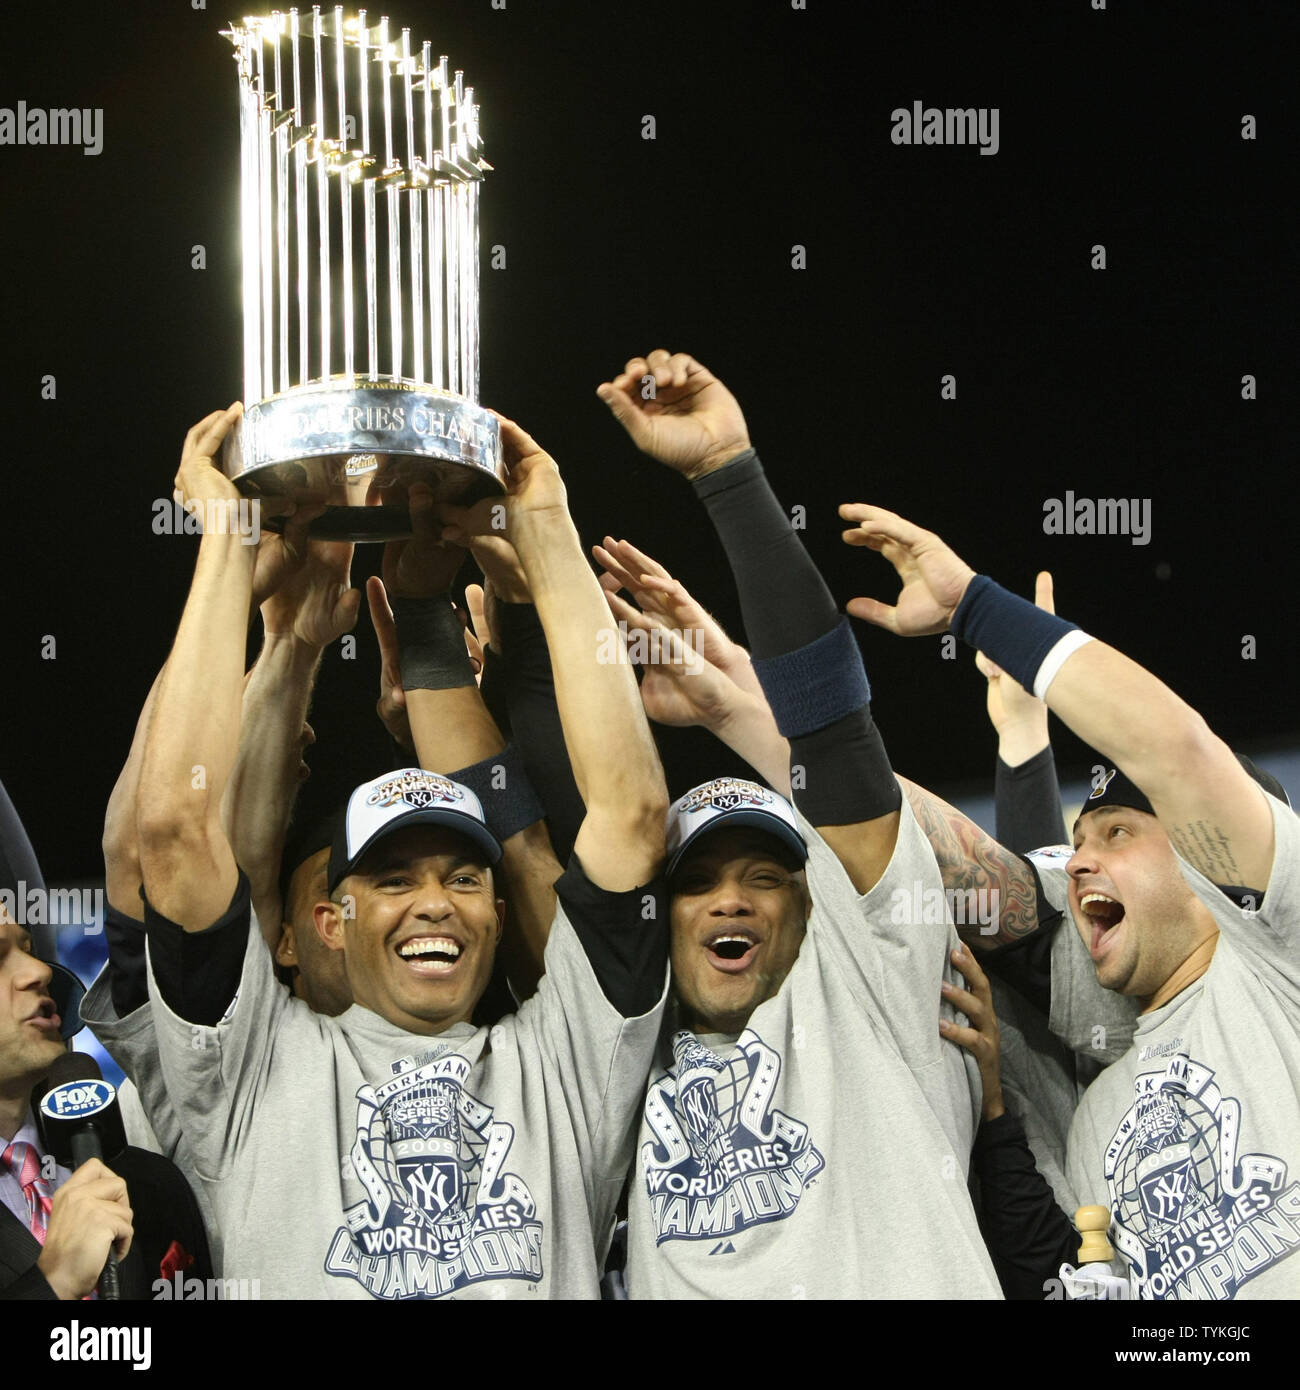 Mariano Rivera (L), hoists the championship trophy as Melky Cabrera,  center, and Nick Swisher of the New York Yankees celebrate their World  Series win after defeating the Philadelphia Phillies in game six